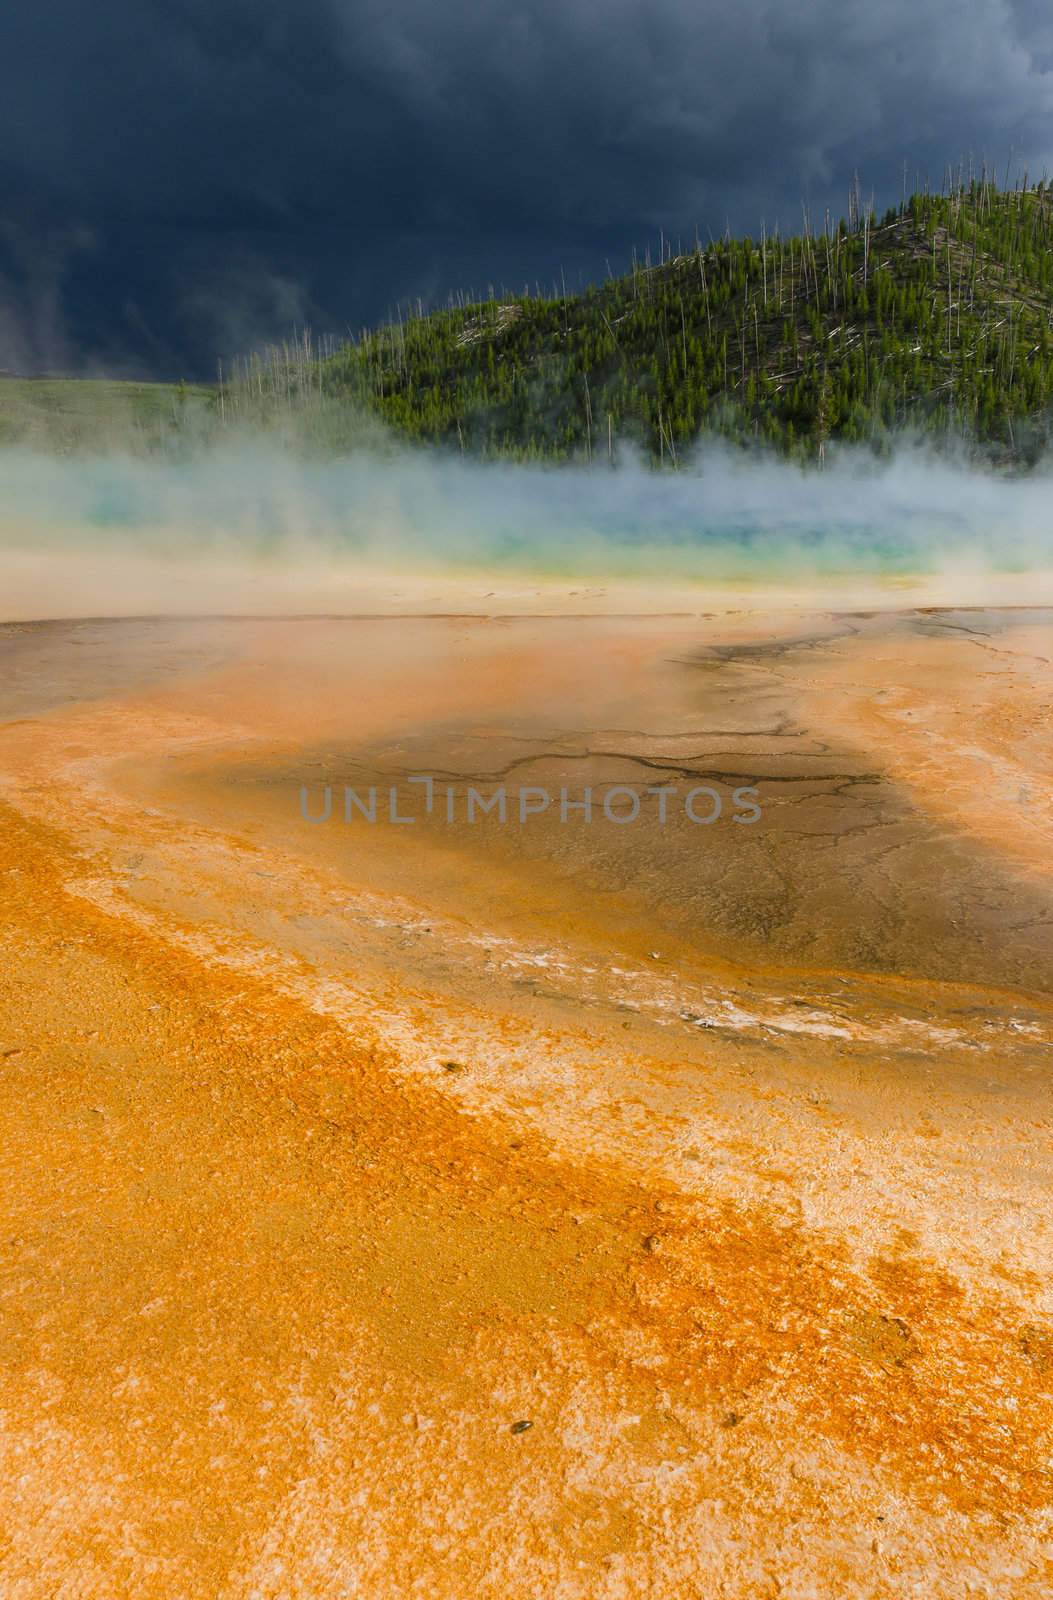 Grand Prismatic Spring and dark storm clouds, Yellowstone National Park, Wyoming, USA by CharlesBolin